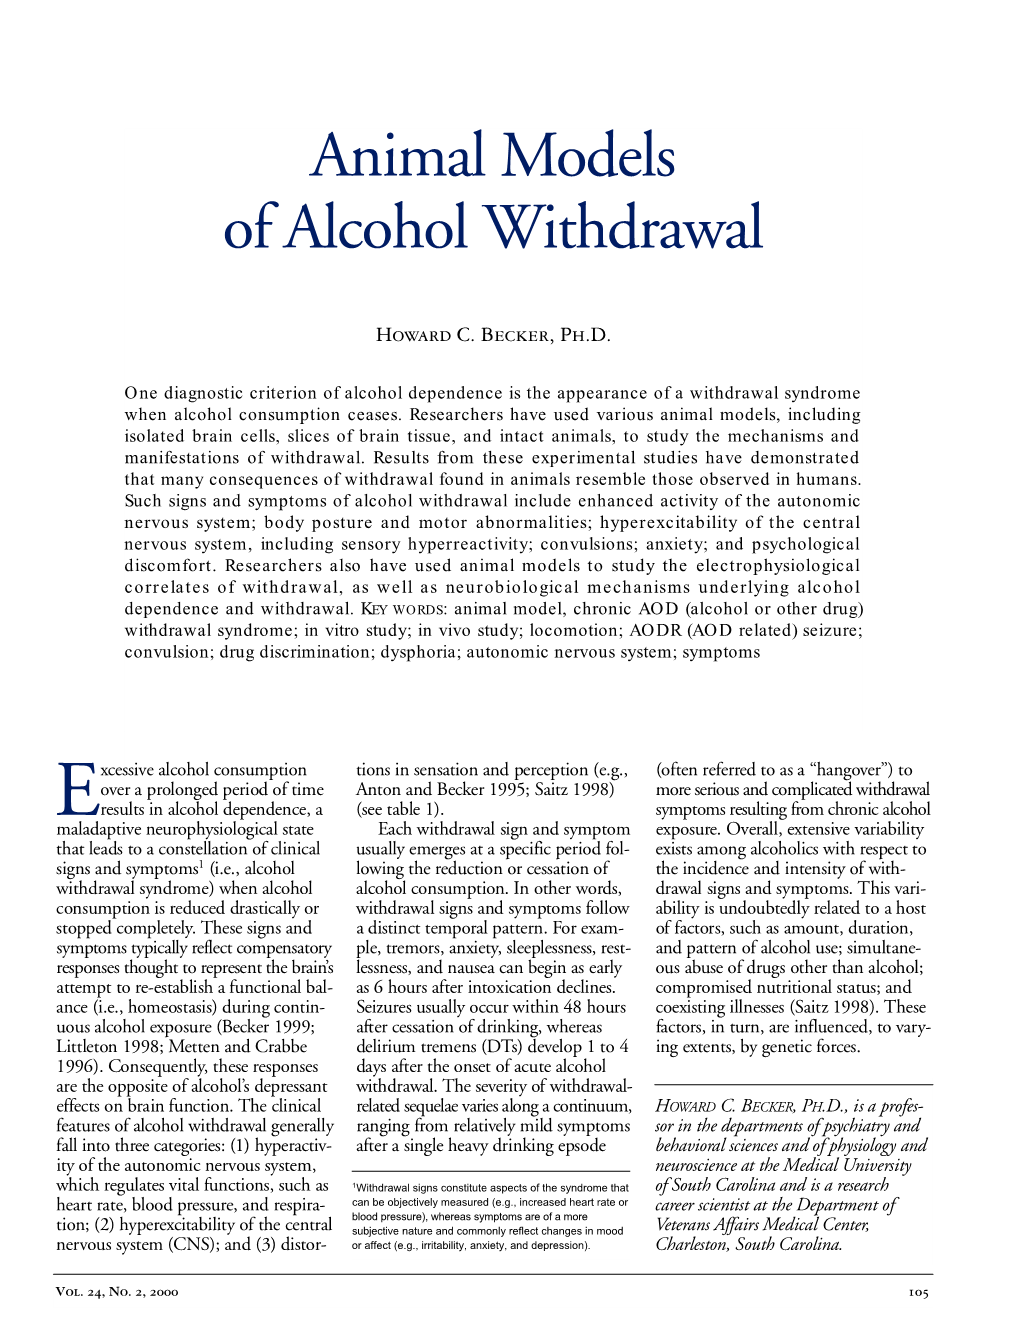 Animal Models of Alcohol Withdrawal